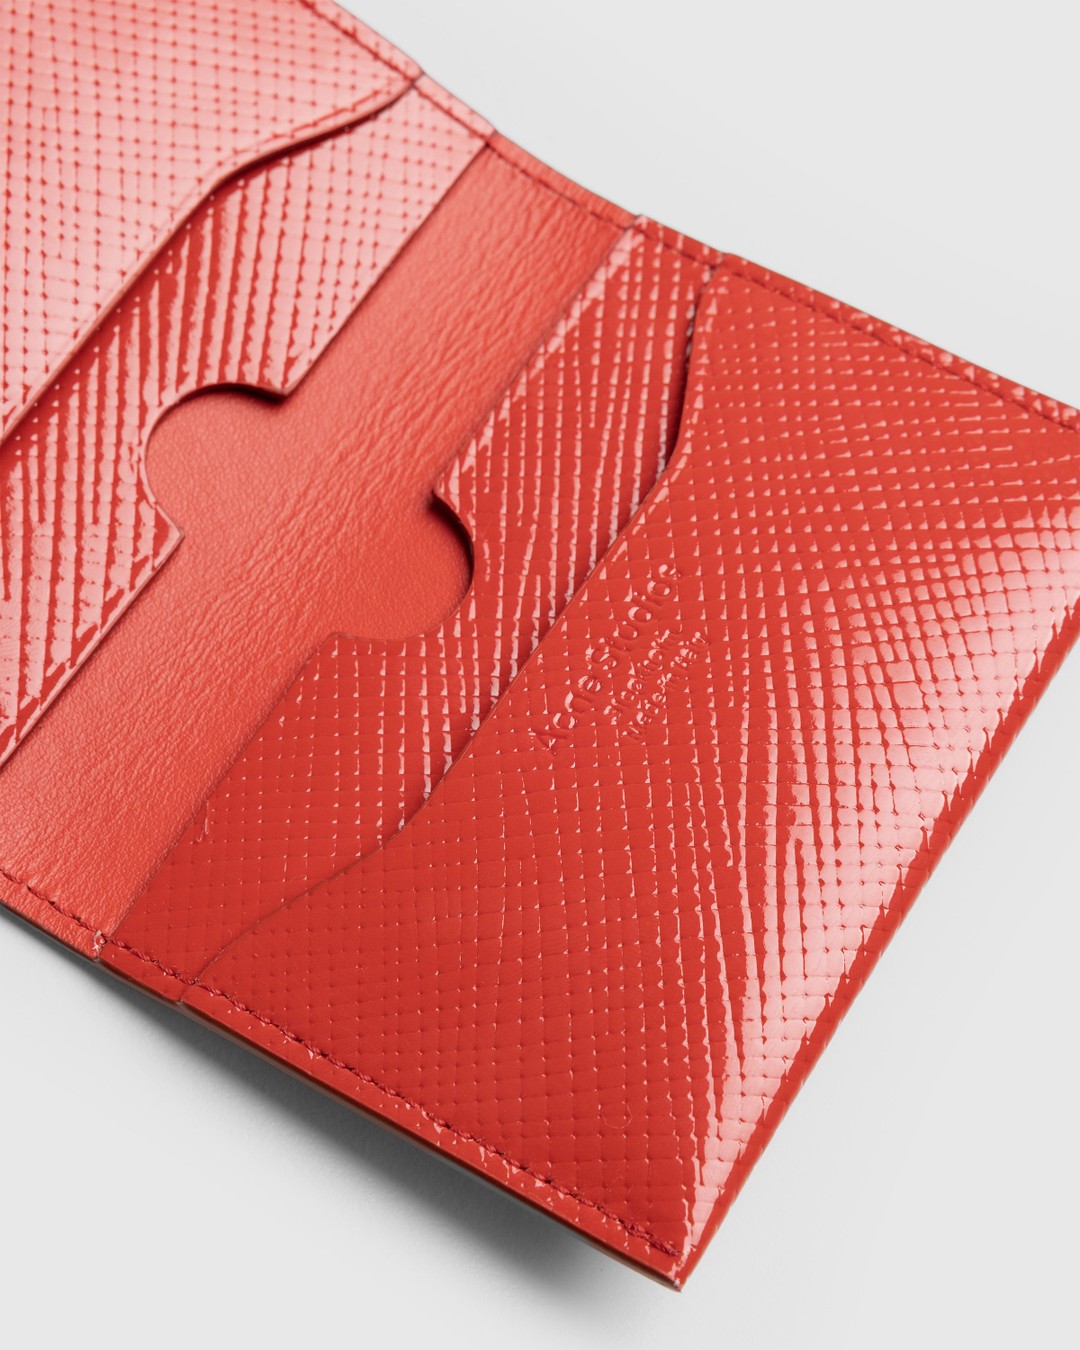 Acne Studios – Folded Card Holder Red - Wallets - Red - Image 5